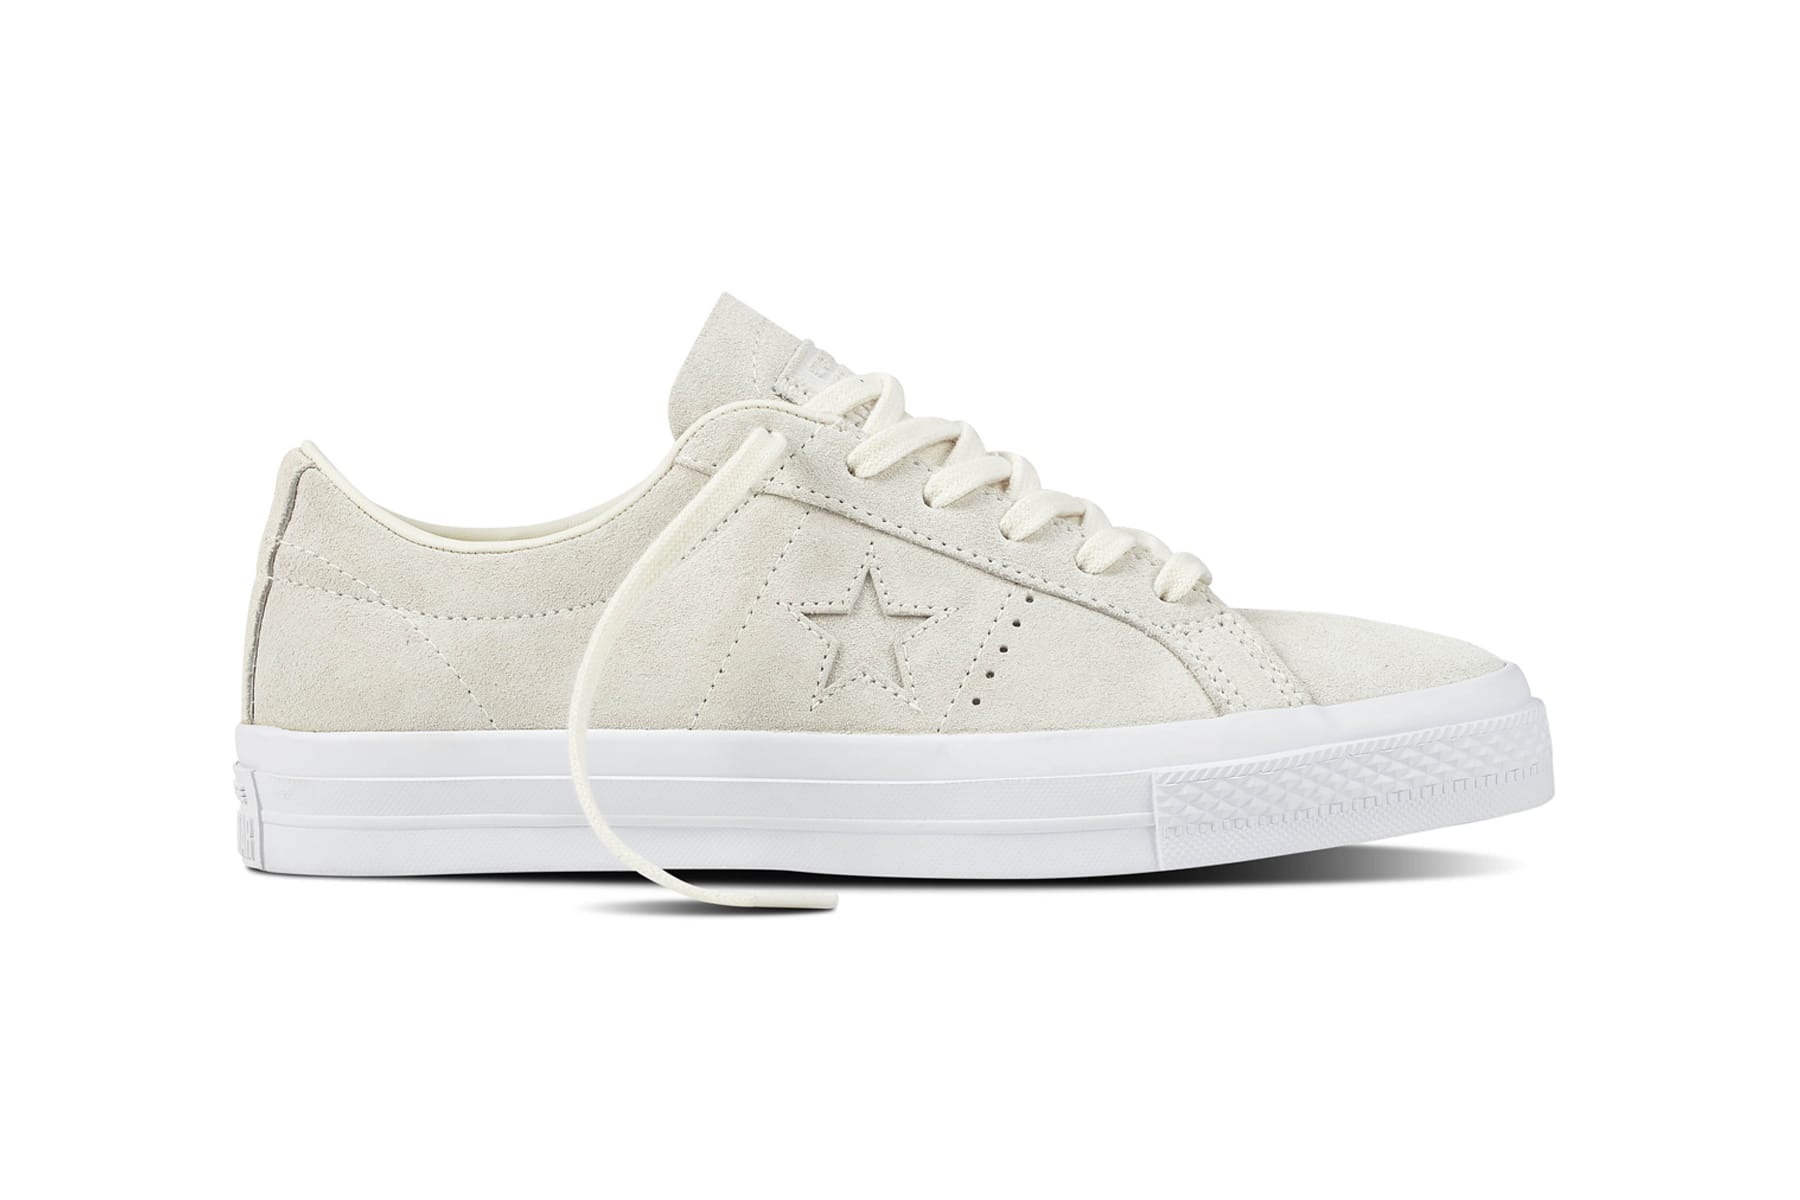 Converse Releases One Star in Pastel 